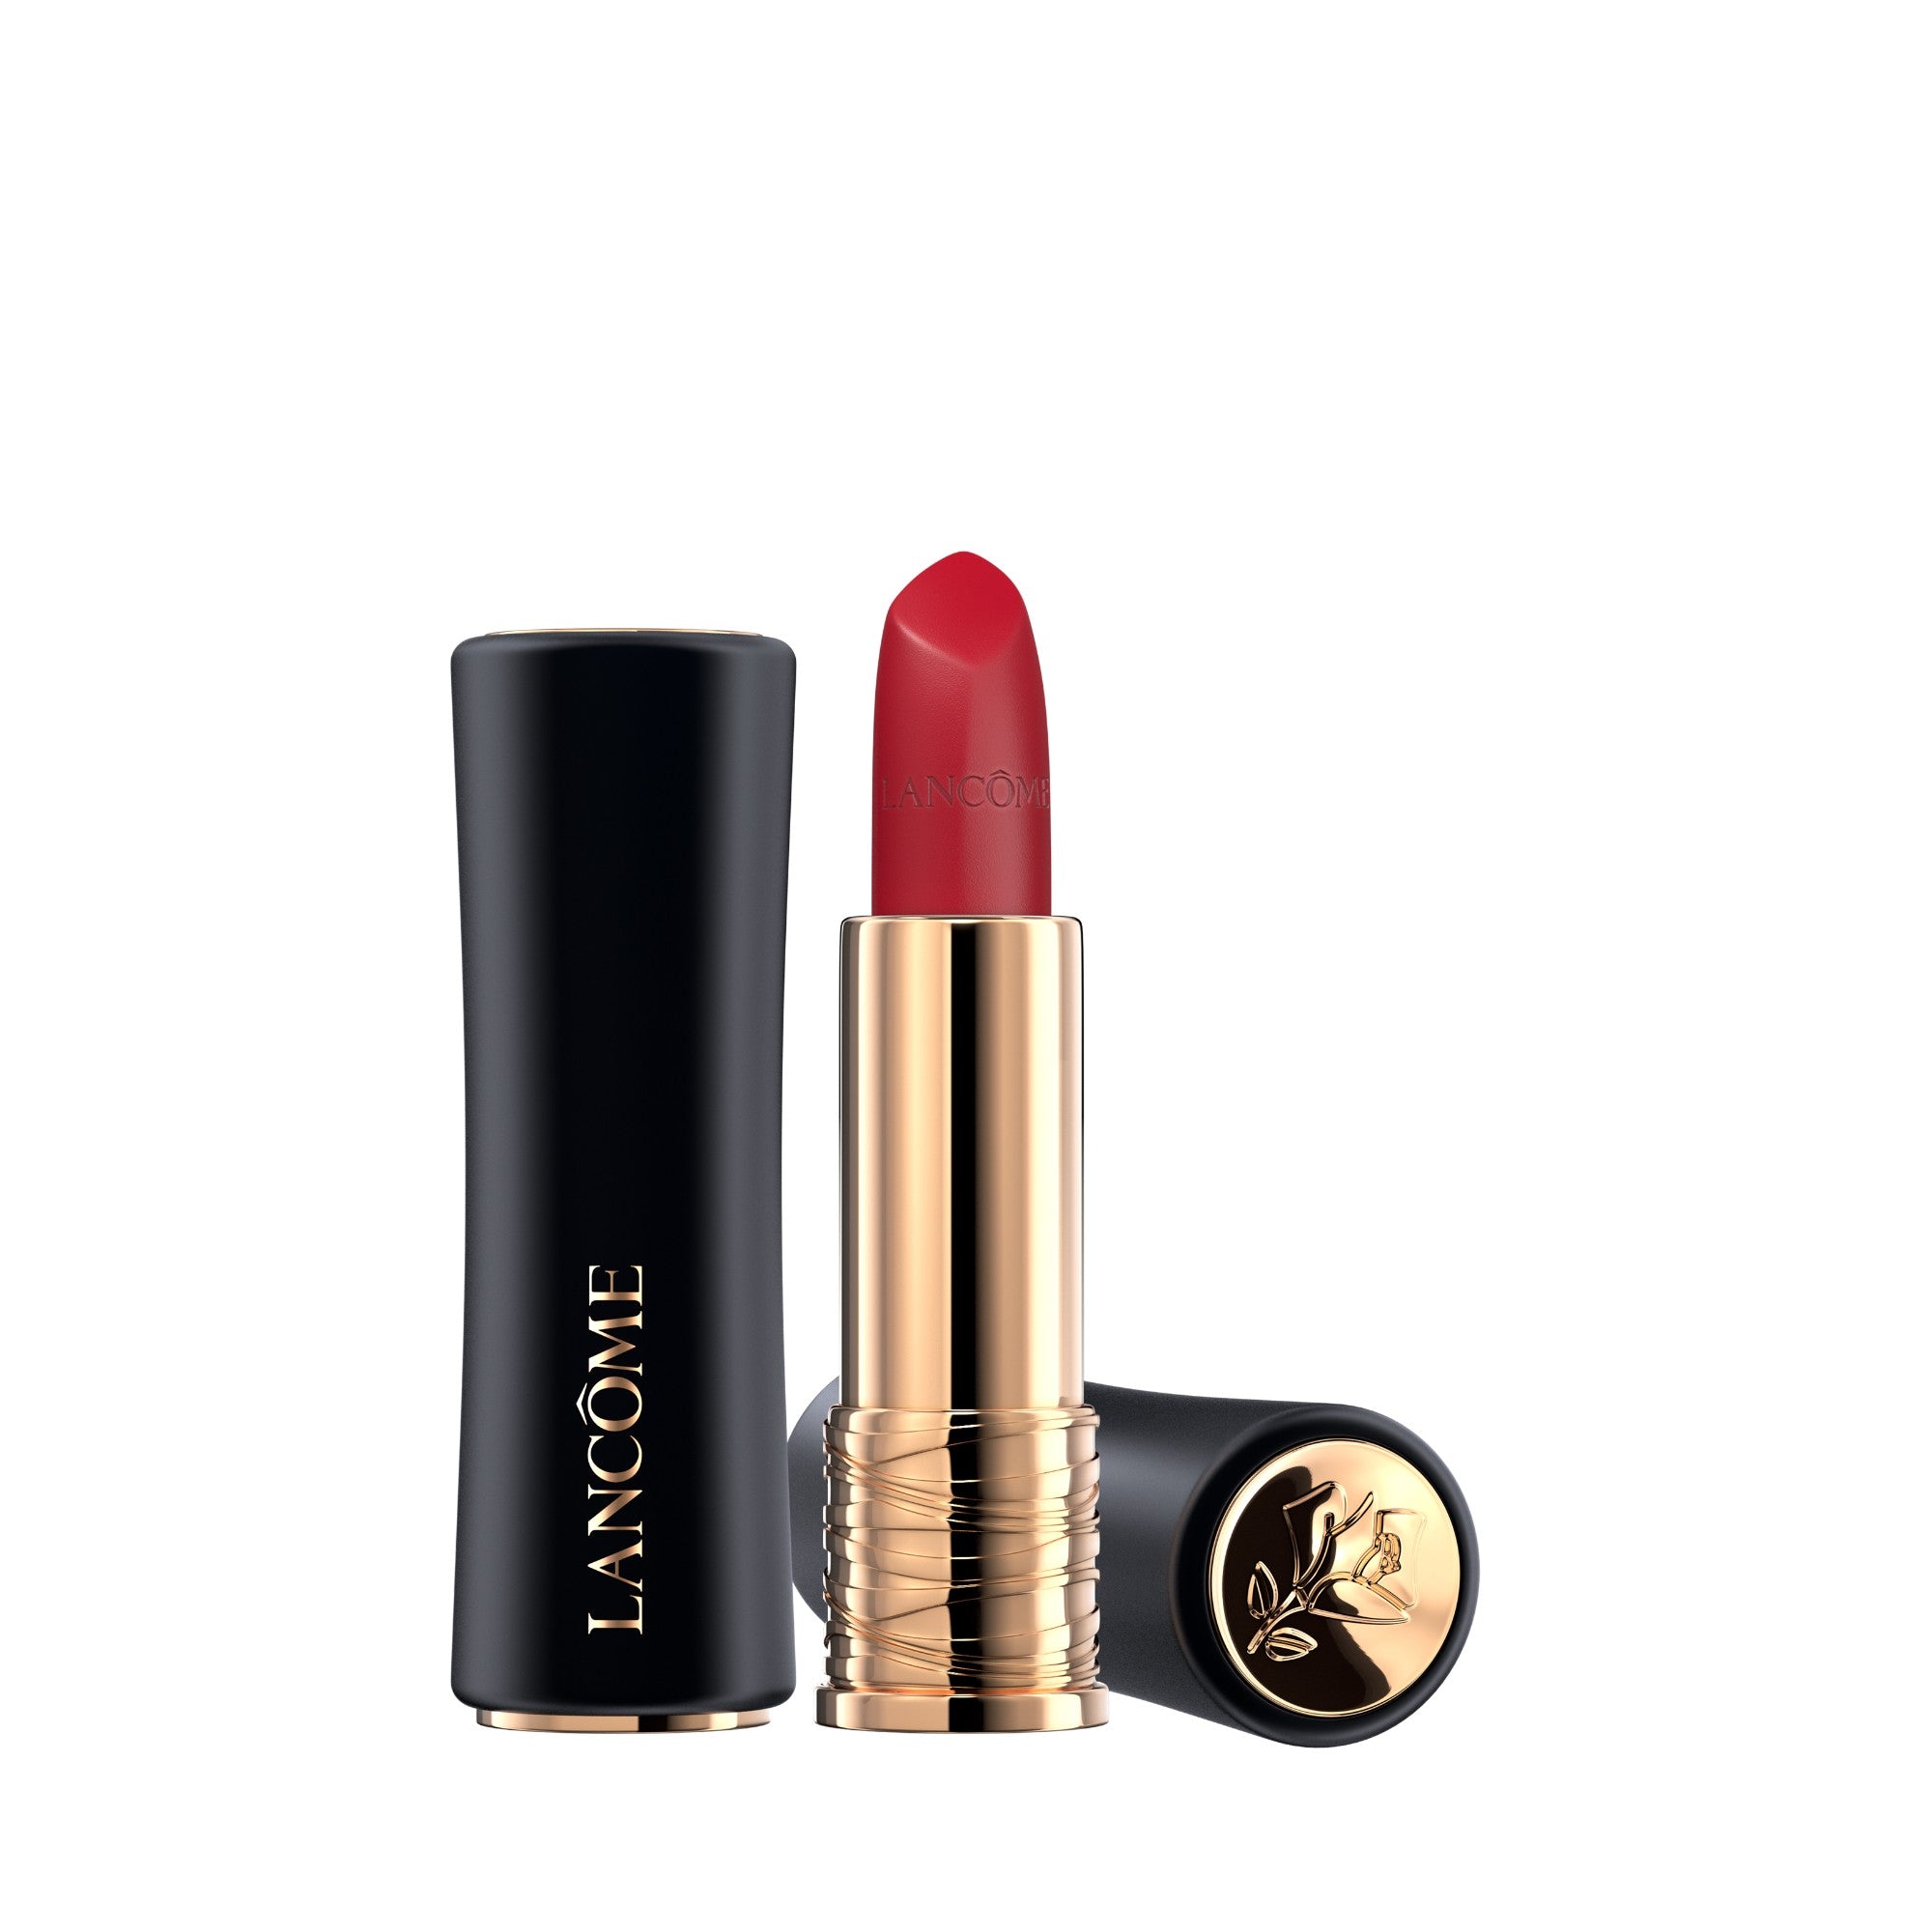 Lancome Absolu Rouge Cream Lipstick Rouge Pigalle Product